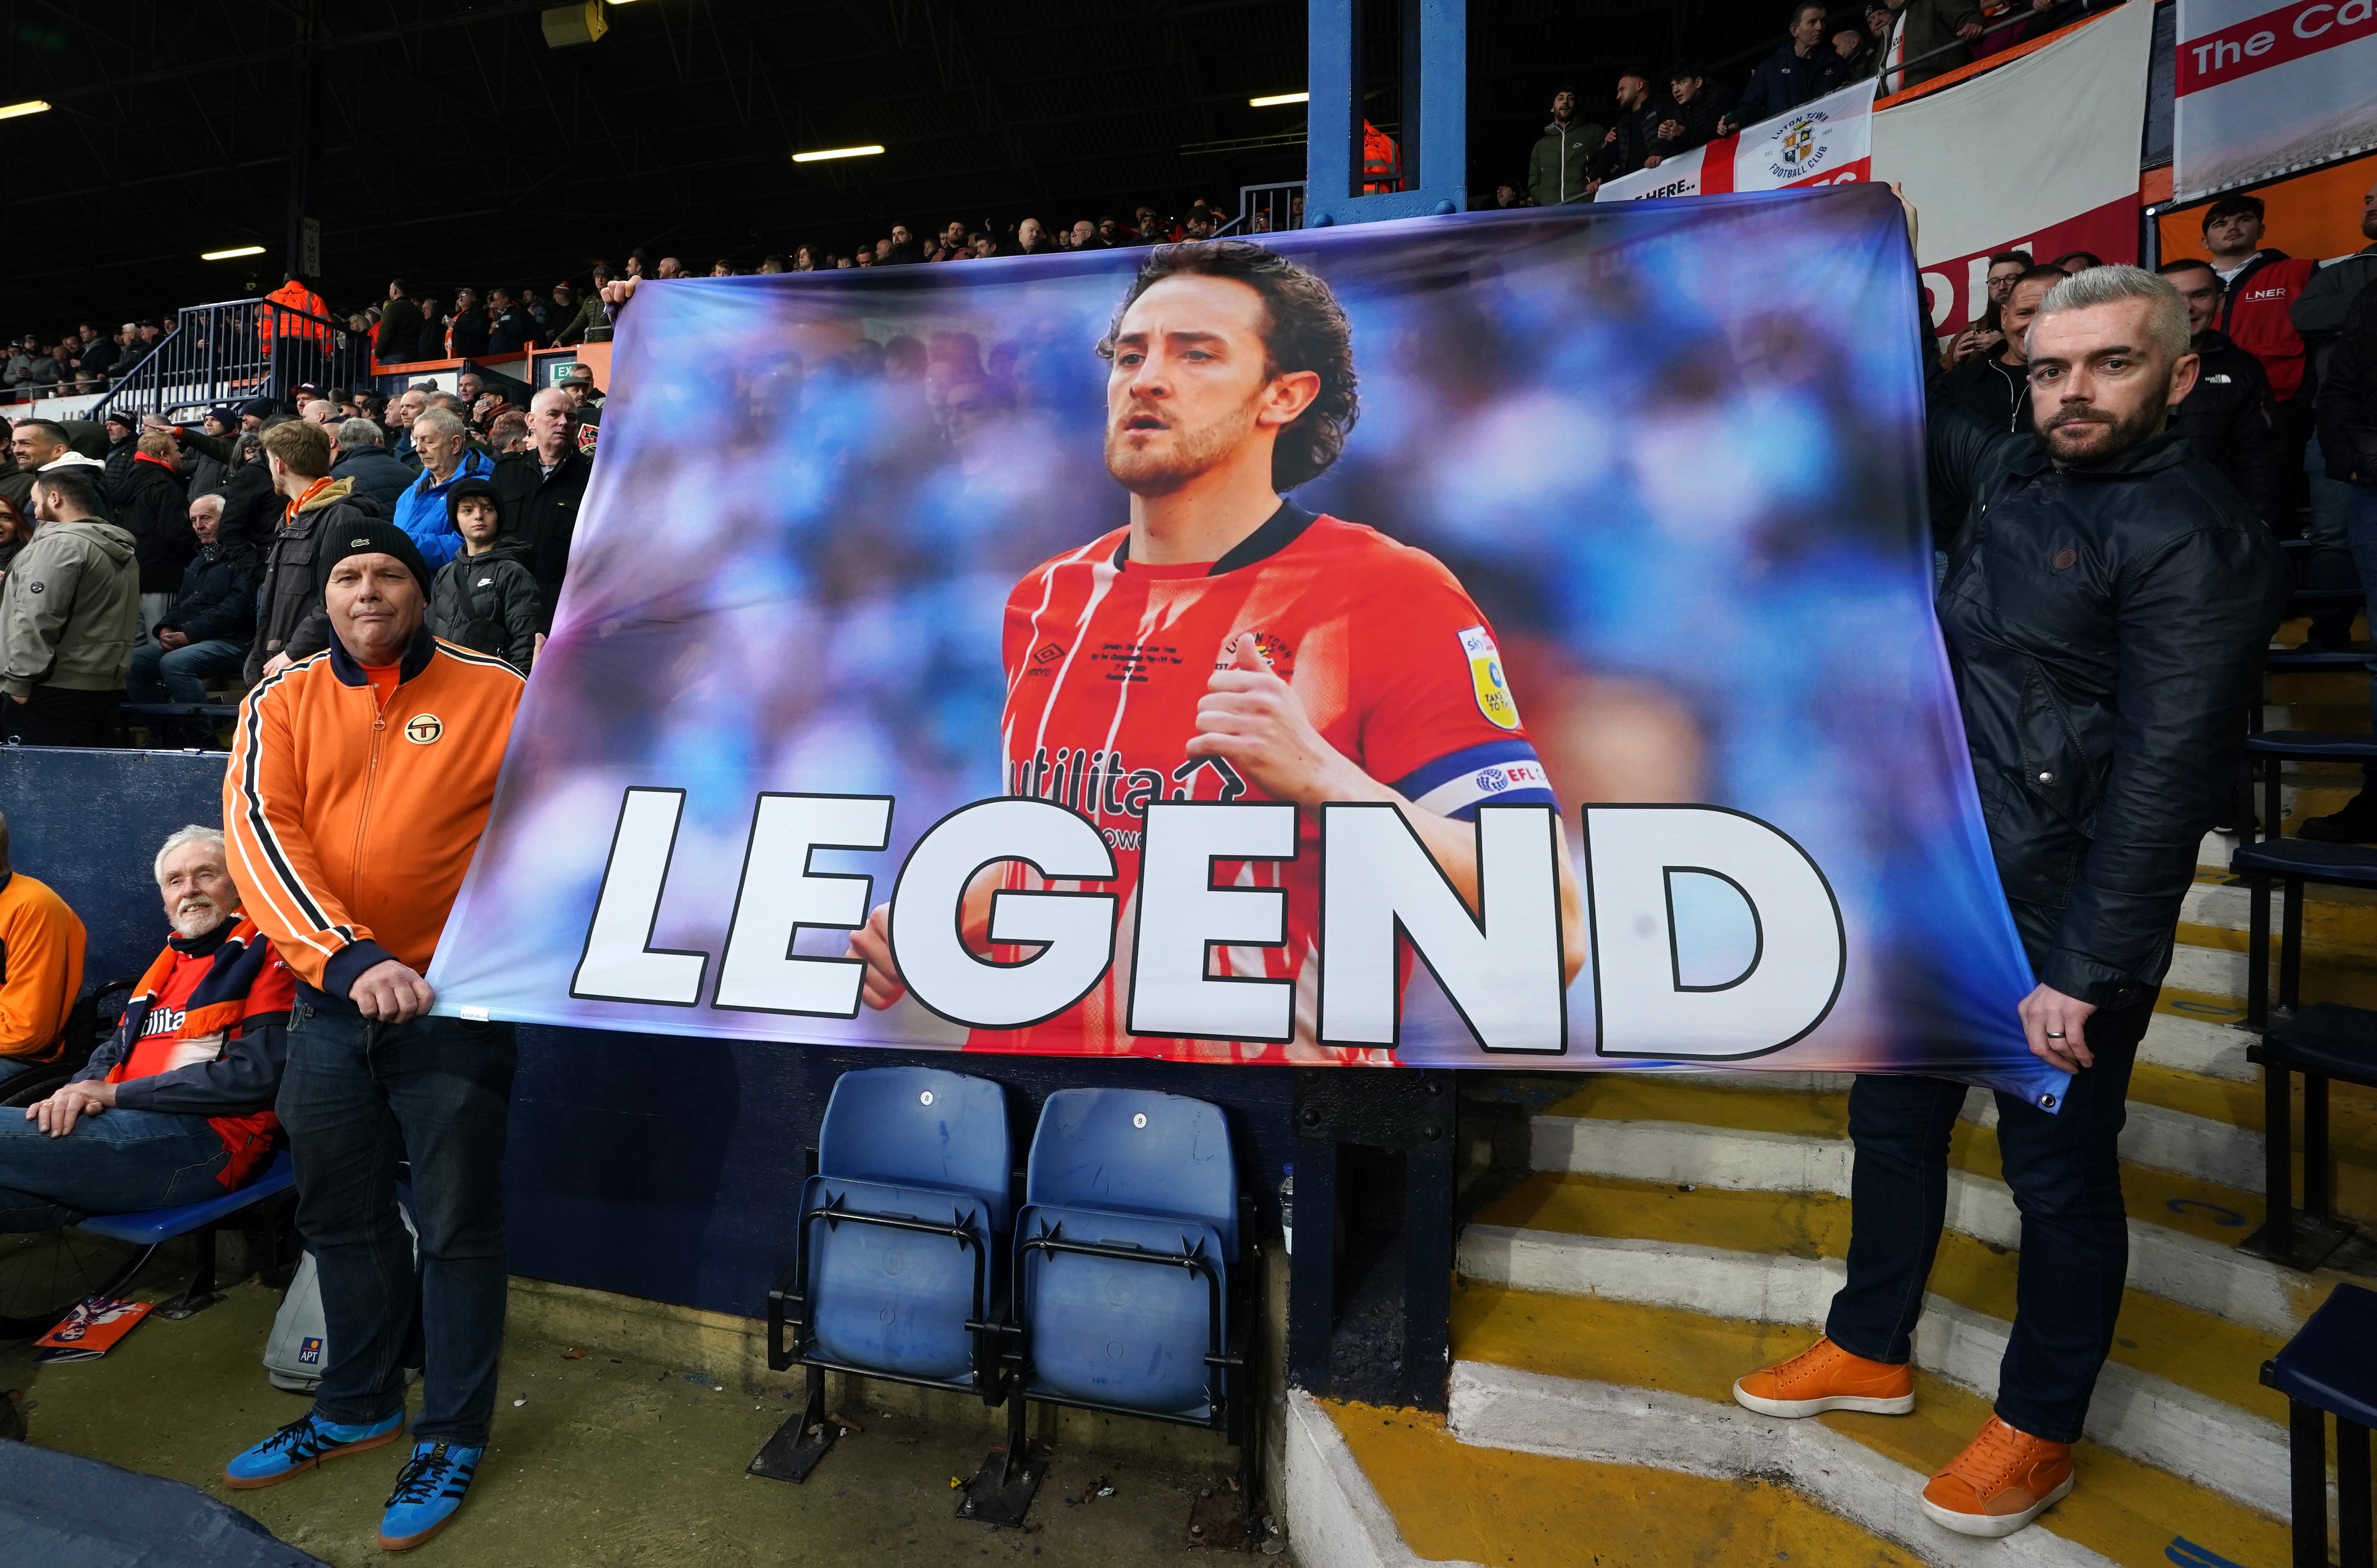 Luton fans hold up a banner of support for Tom Lockyer